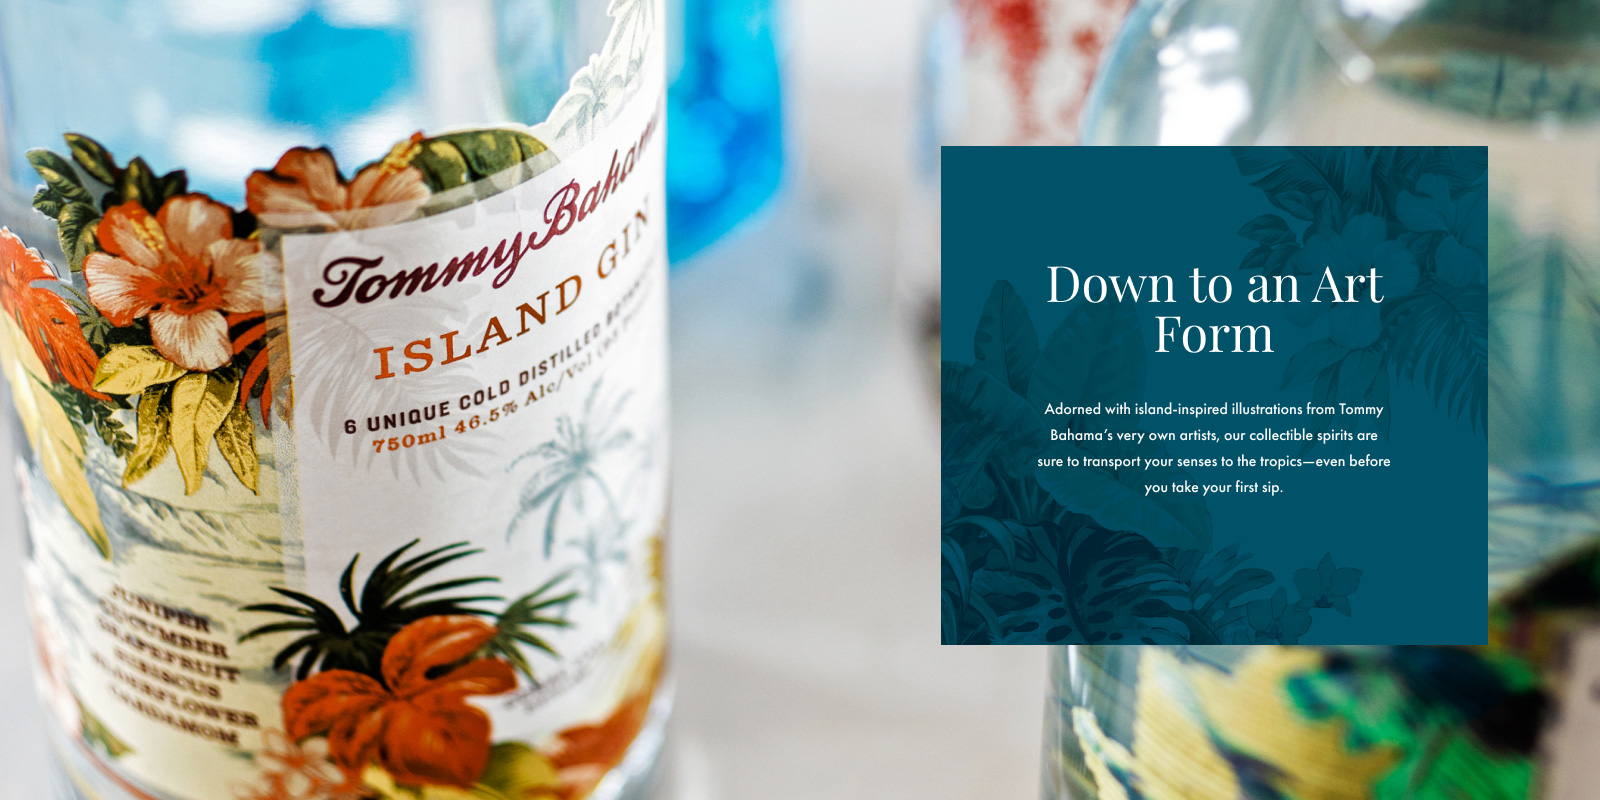 Down to an Art Form: Bottle illustrations inspired by Tommy Bahama's artists